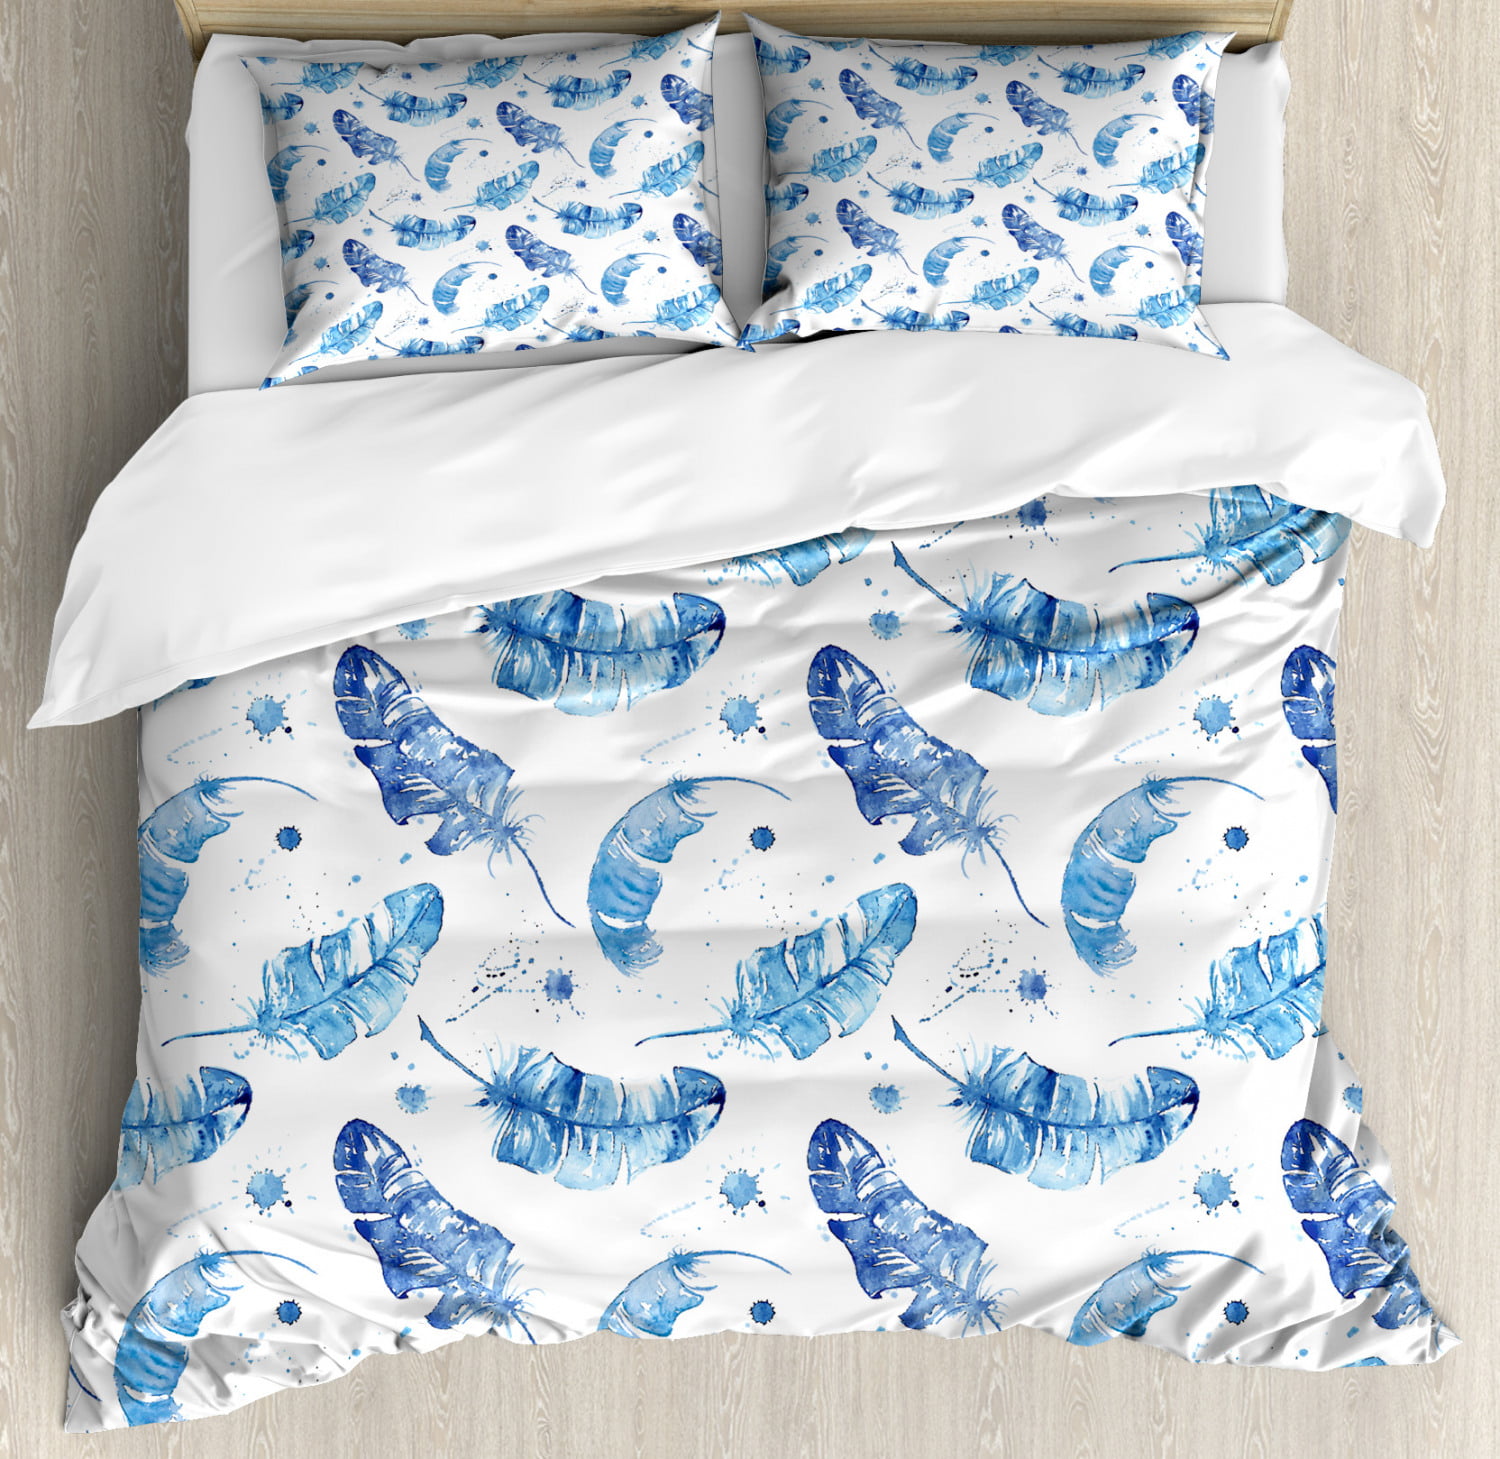 Feather King Size Duvet Cover Set Watercolor Quill Design With